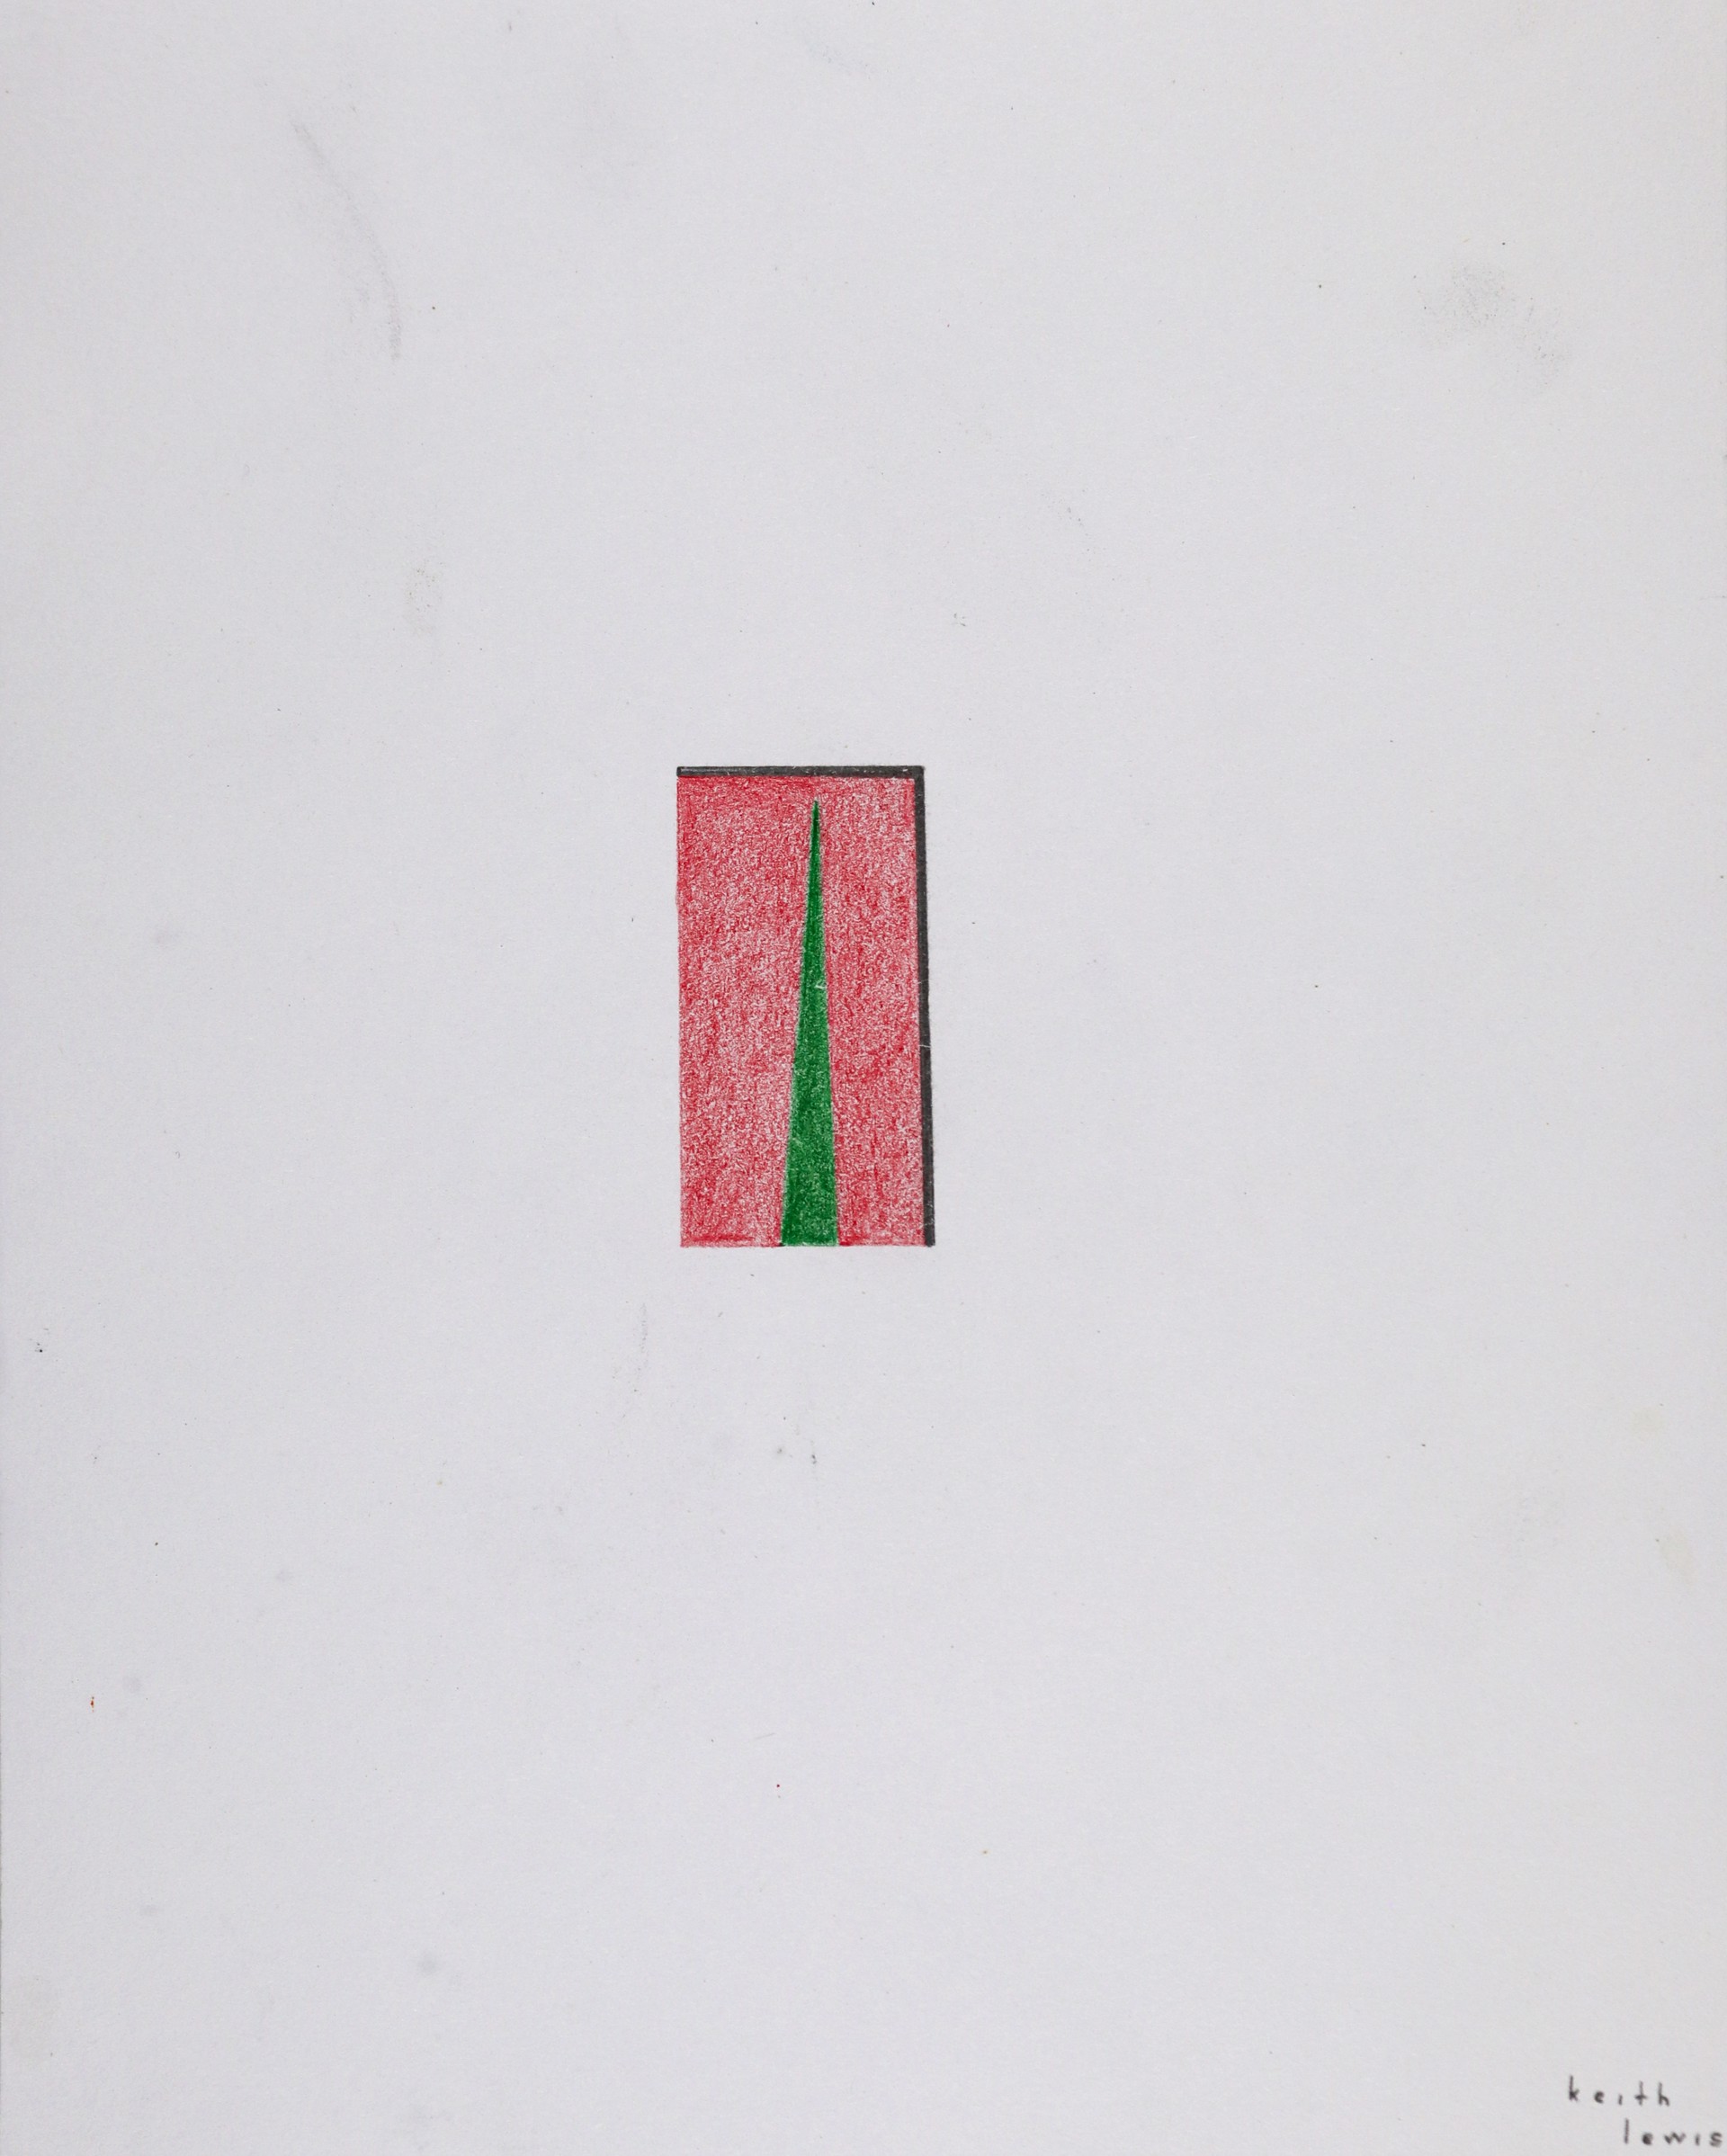 Composition 5 (red and green) by Keith Lewis